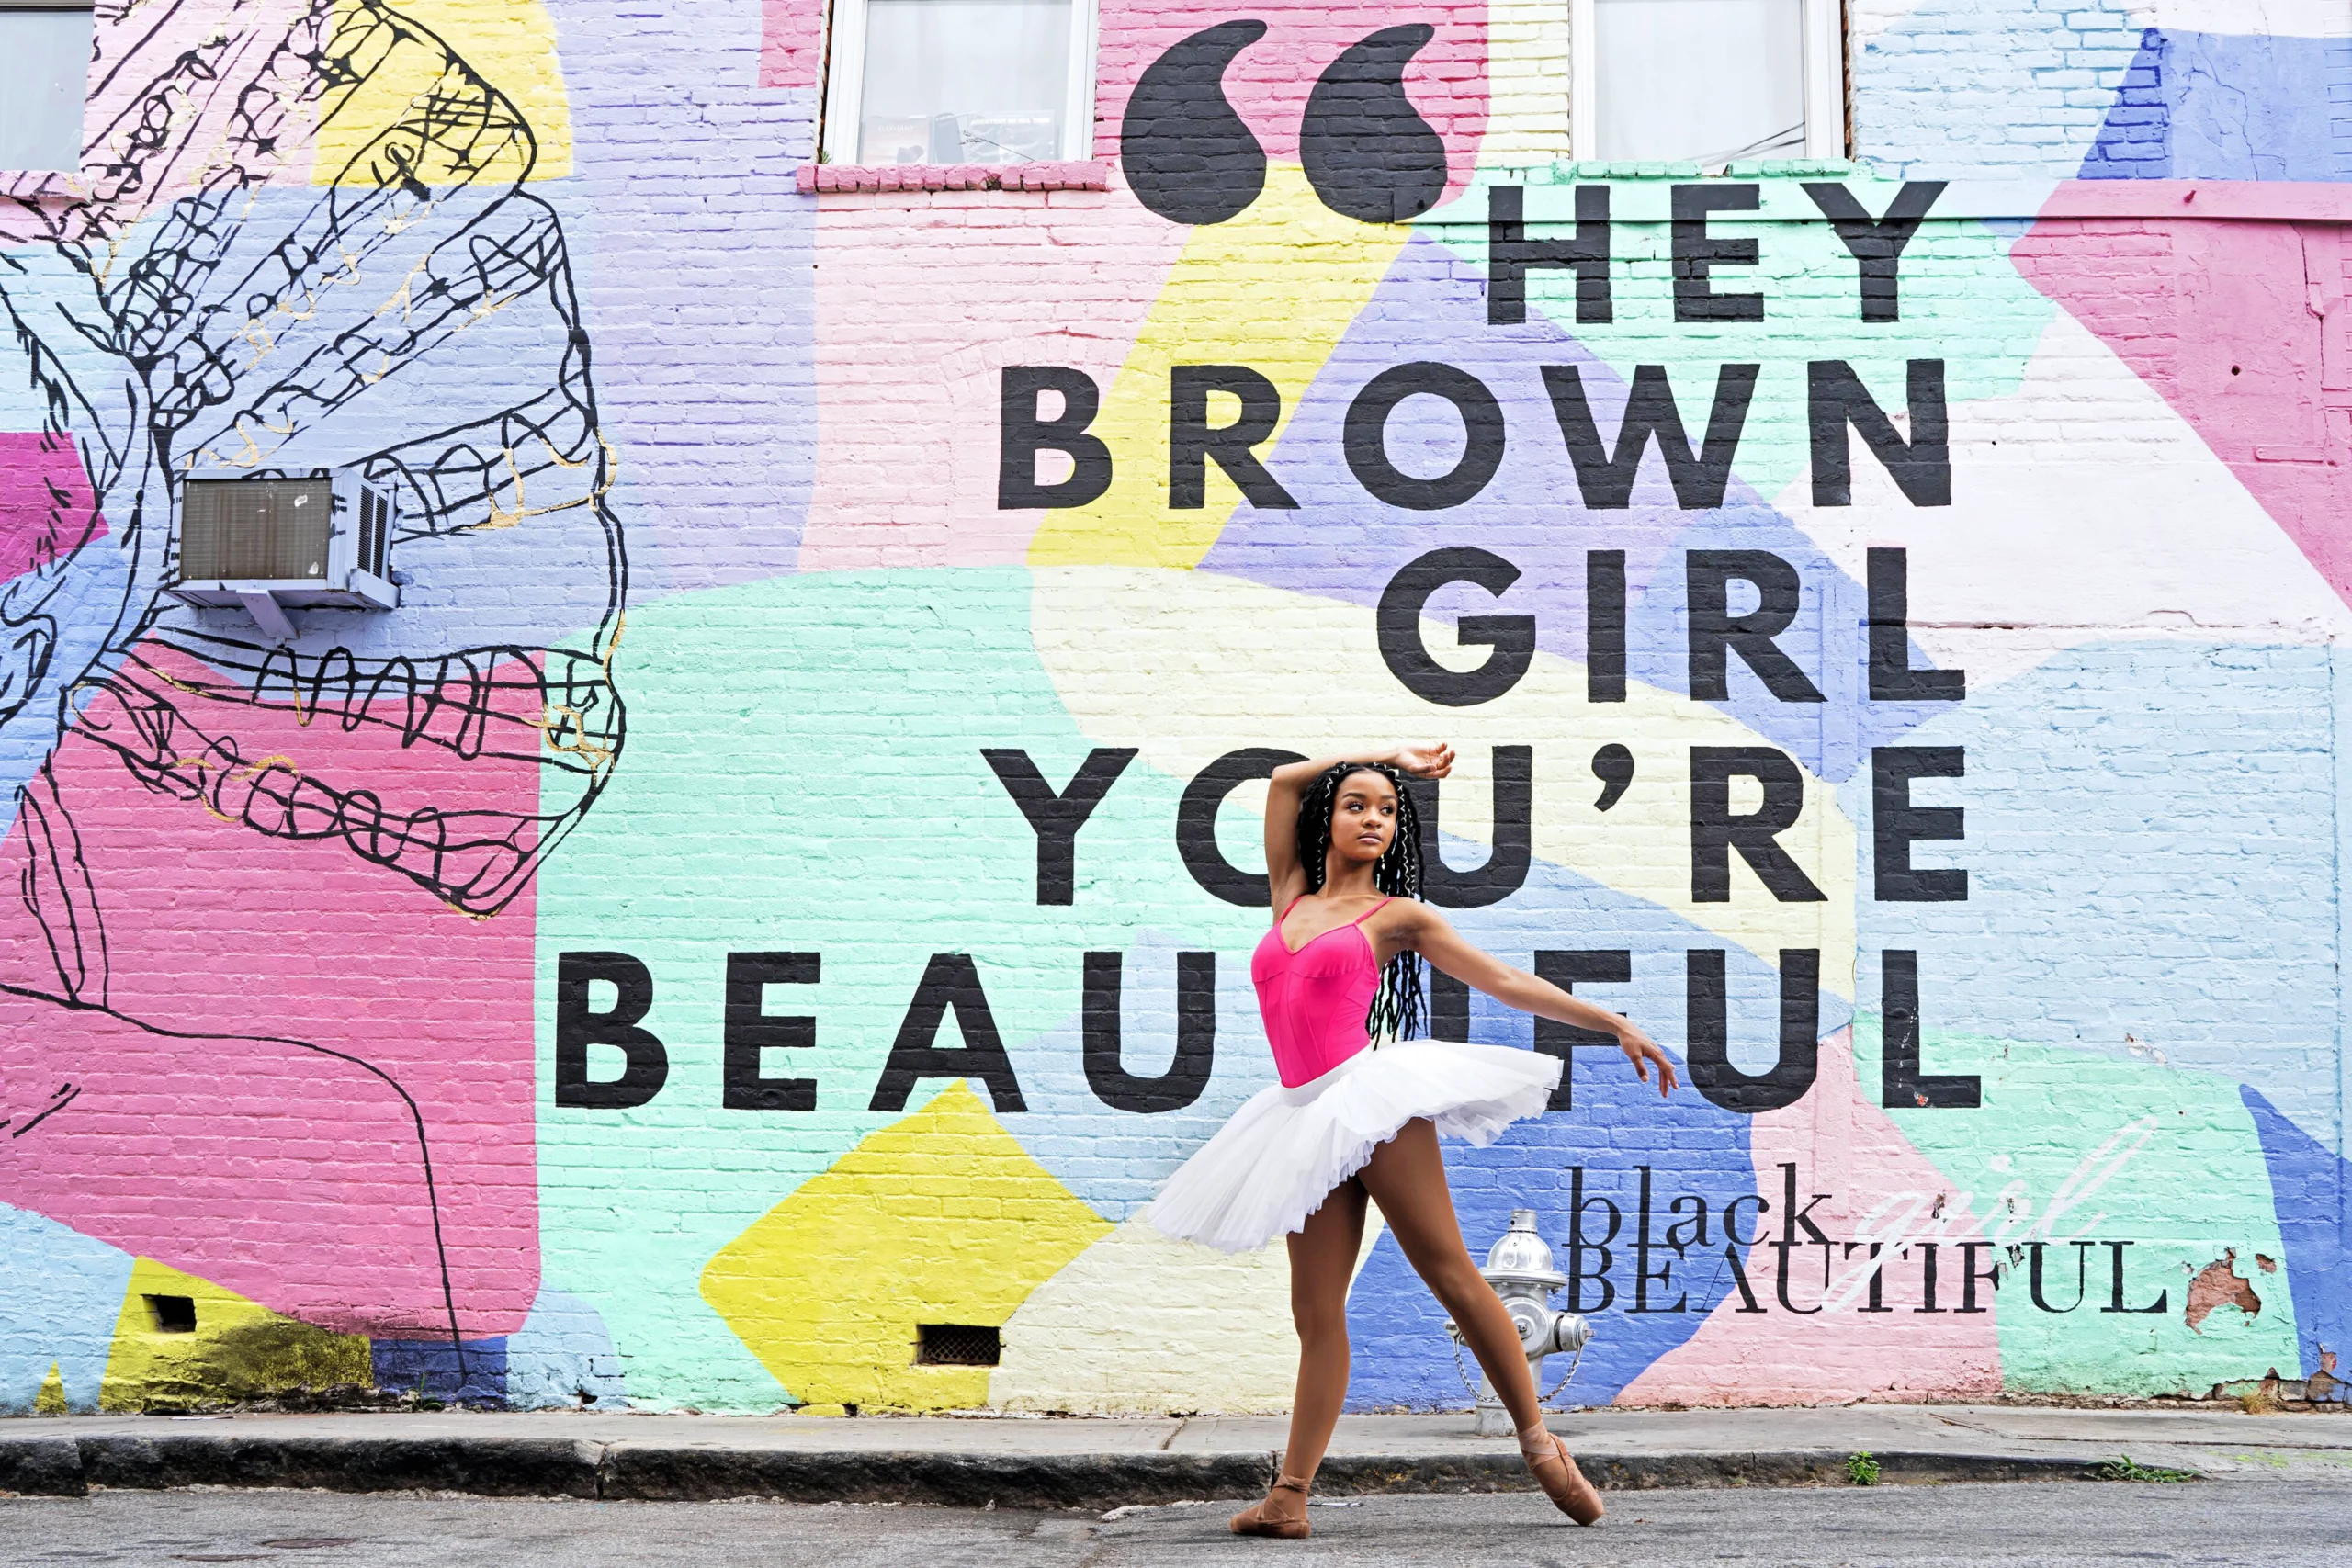 A young Black dancer poses in front of a colorful mural that says "Hey Brown Girl, You're Beautiful." She wears a hot pink leotard and a white tutu, with flesh-colored pointe shoes. She poses in tendu derriere, her torso twisted toward the camera. Her right arm drapes over her head, and her left extends in a low allongé behind her.